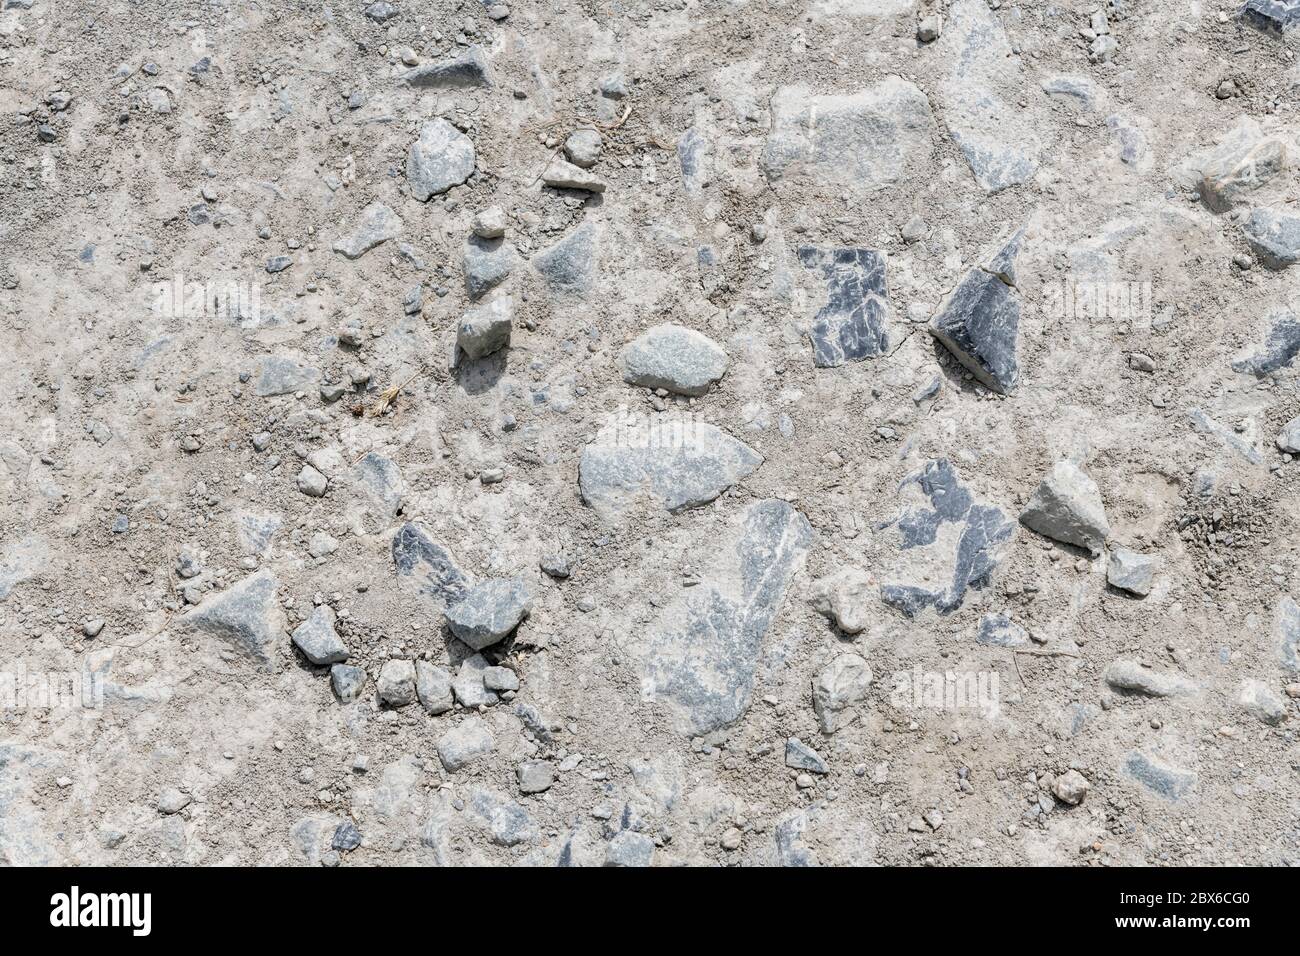 Rough gravelly and stony dirt track caked with mud & baked dry in summer sun. Fall on stony ground metaphor, bumpy ride, uneven surface, rough texture Stock Photo